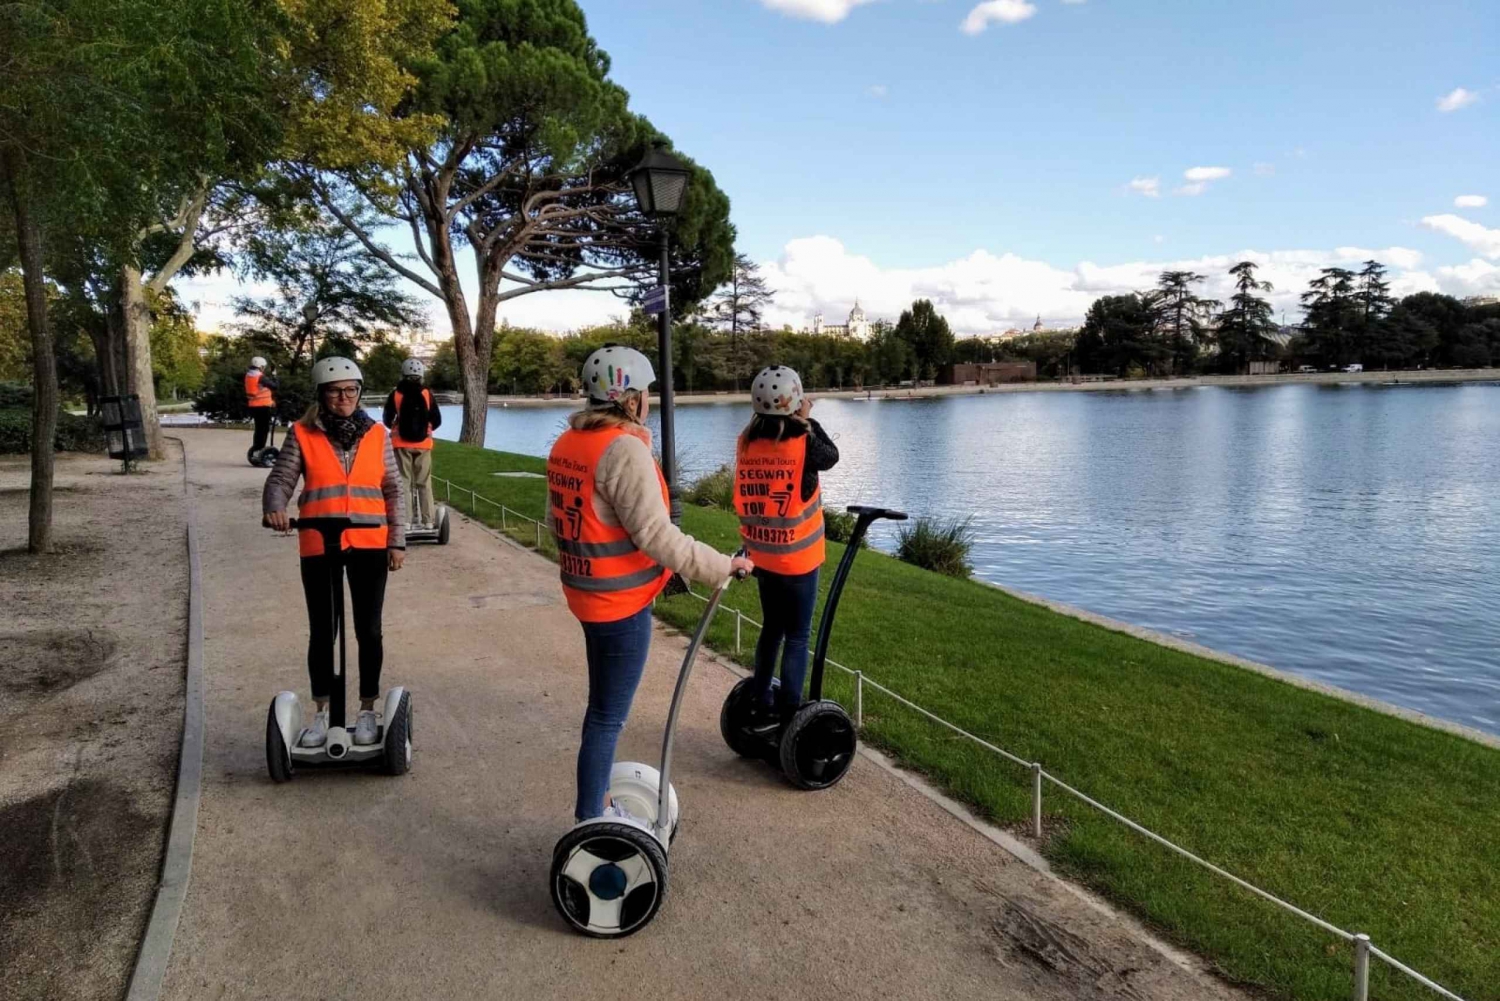 Segway Tour: highlights of Madrid in a Small Group